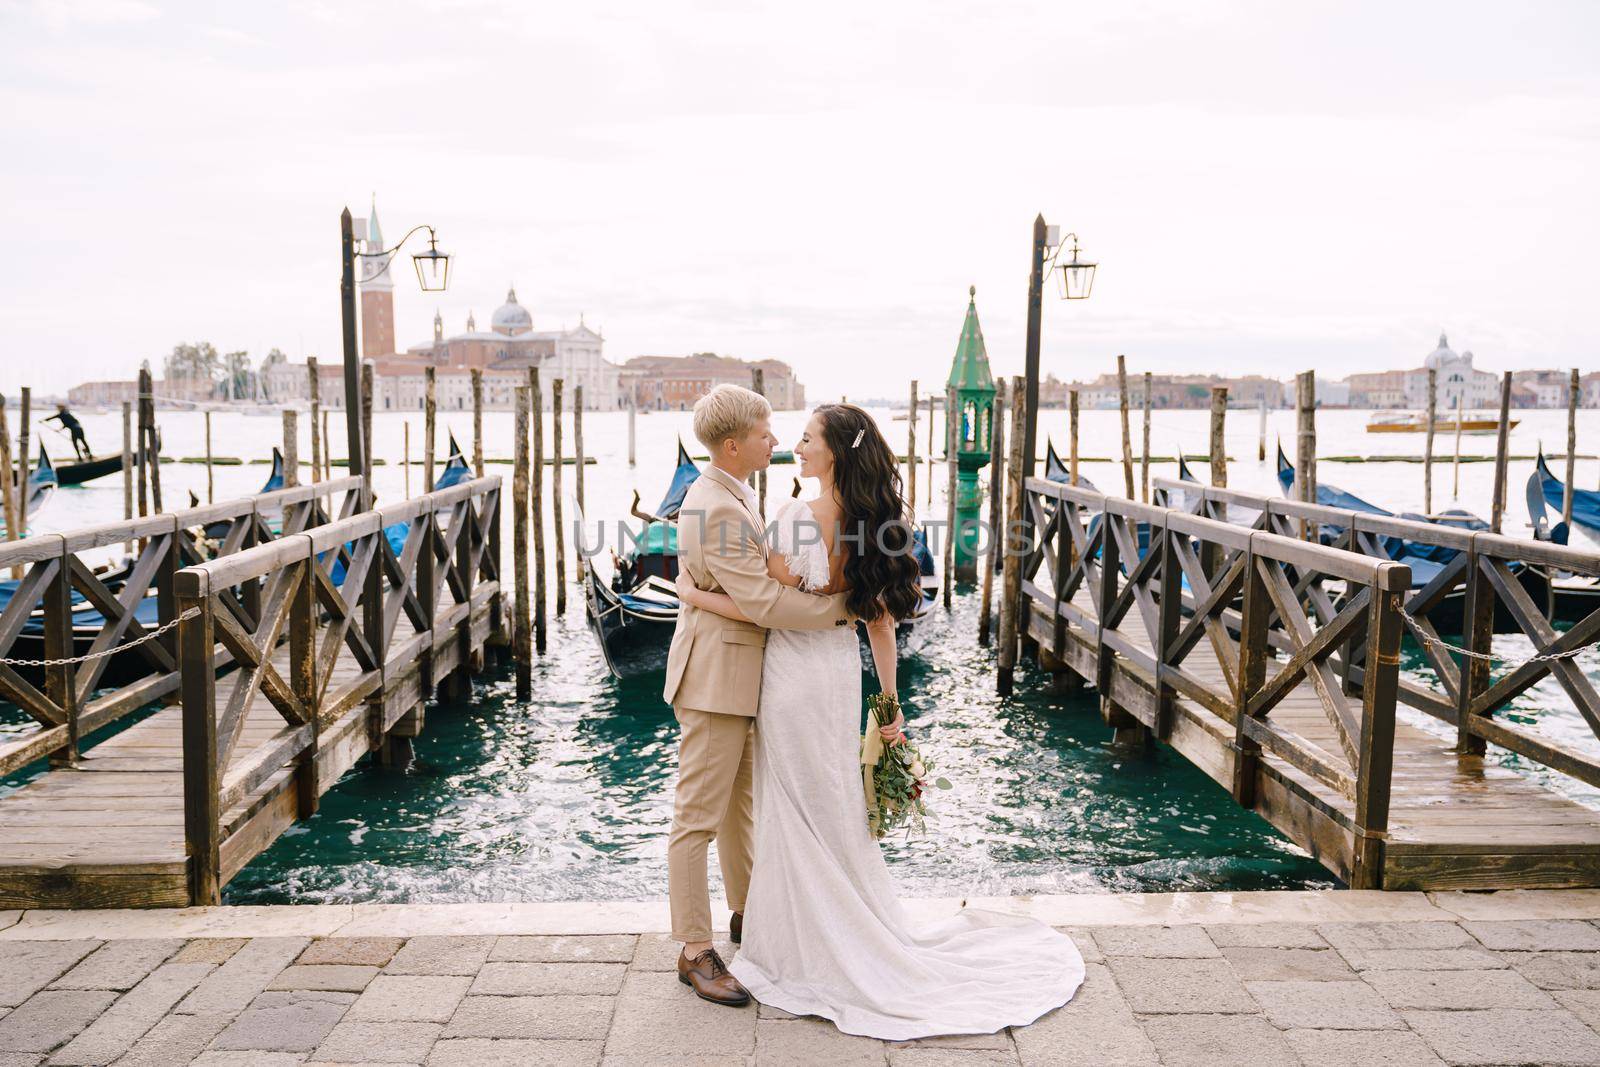 Groom and stand next to the gondola pier, hugging, in Venice, near Piazza San Marco, overlooking San Giorgio Maggiore and the sunset sky. The largest gondola pier in Venice, Italy. by Nadtochiy